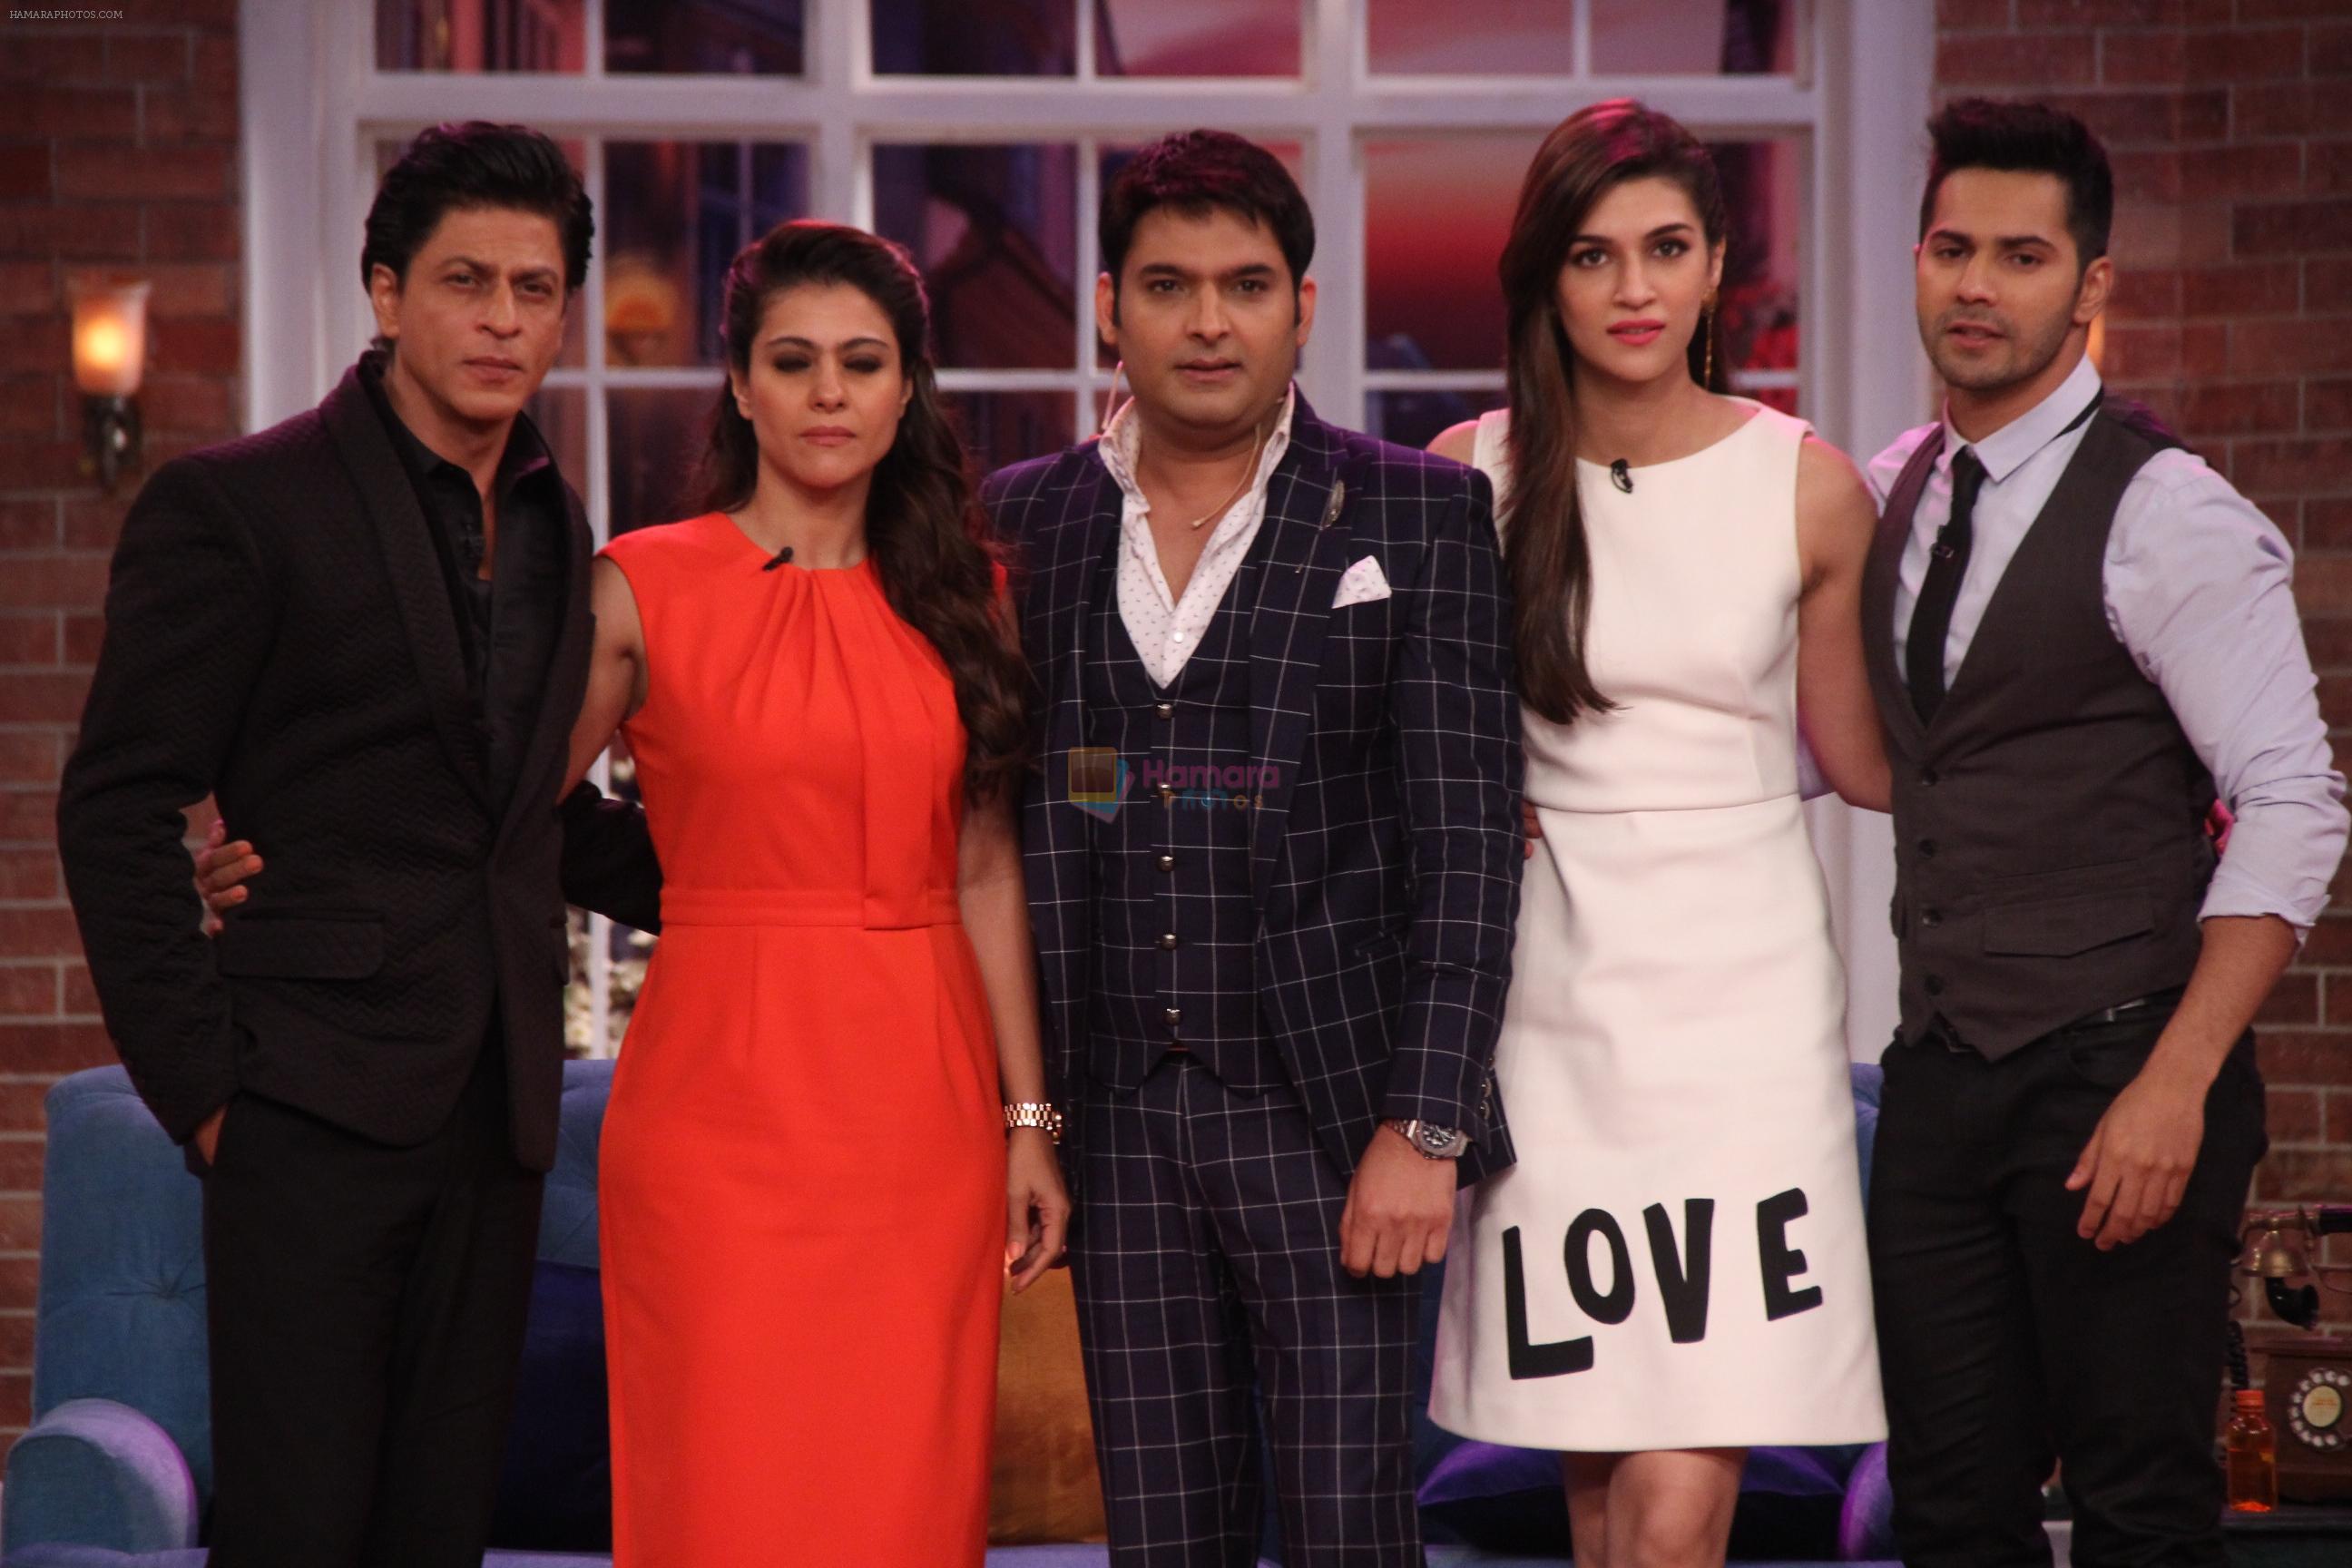 Shahrukh KHan, Kajol, Kriti Sanon, Varun Dhawan with Team Dilwale on the sets of Comedy Nights With Kapil on 10th Dec 2015